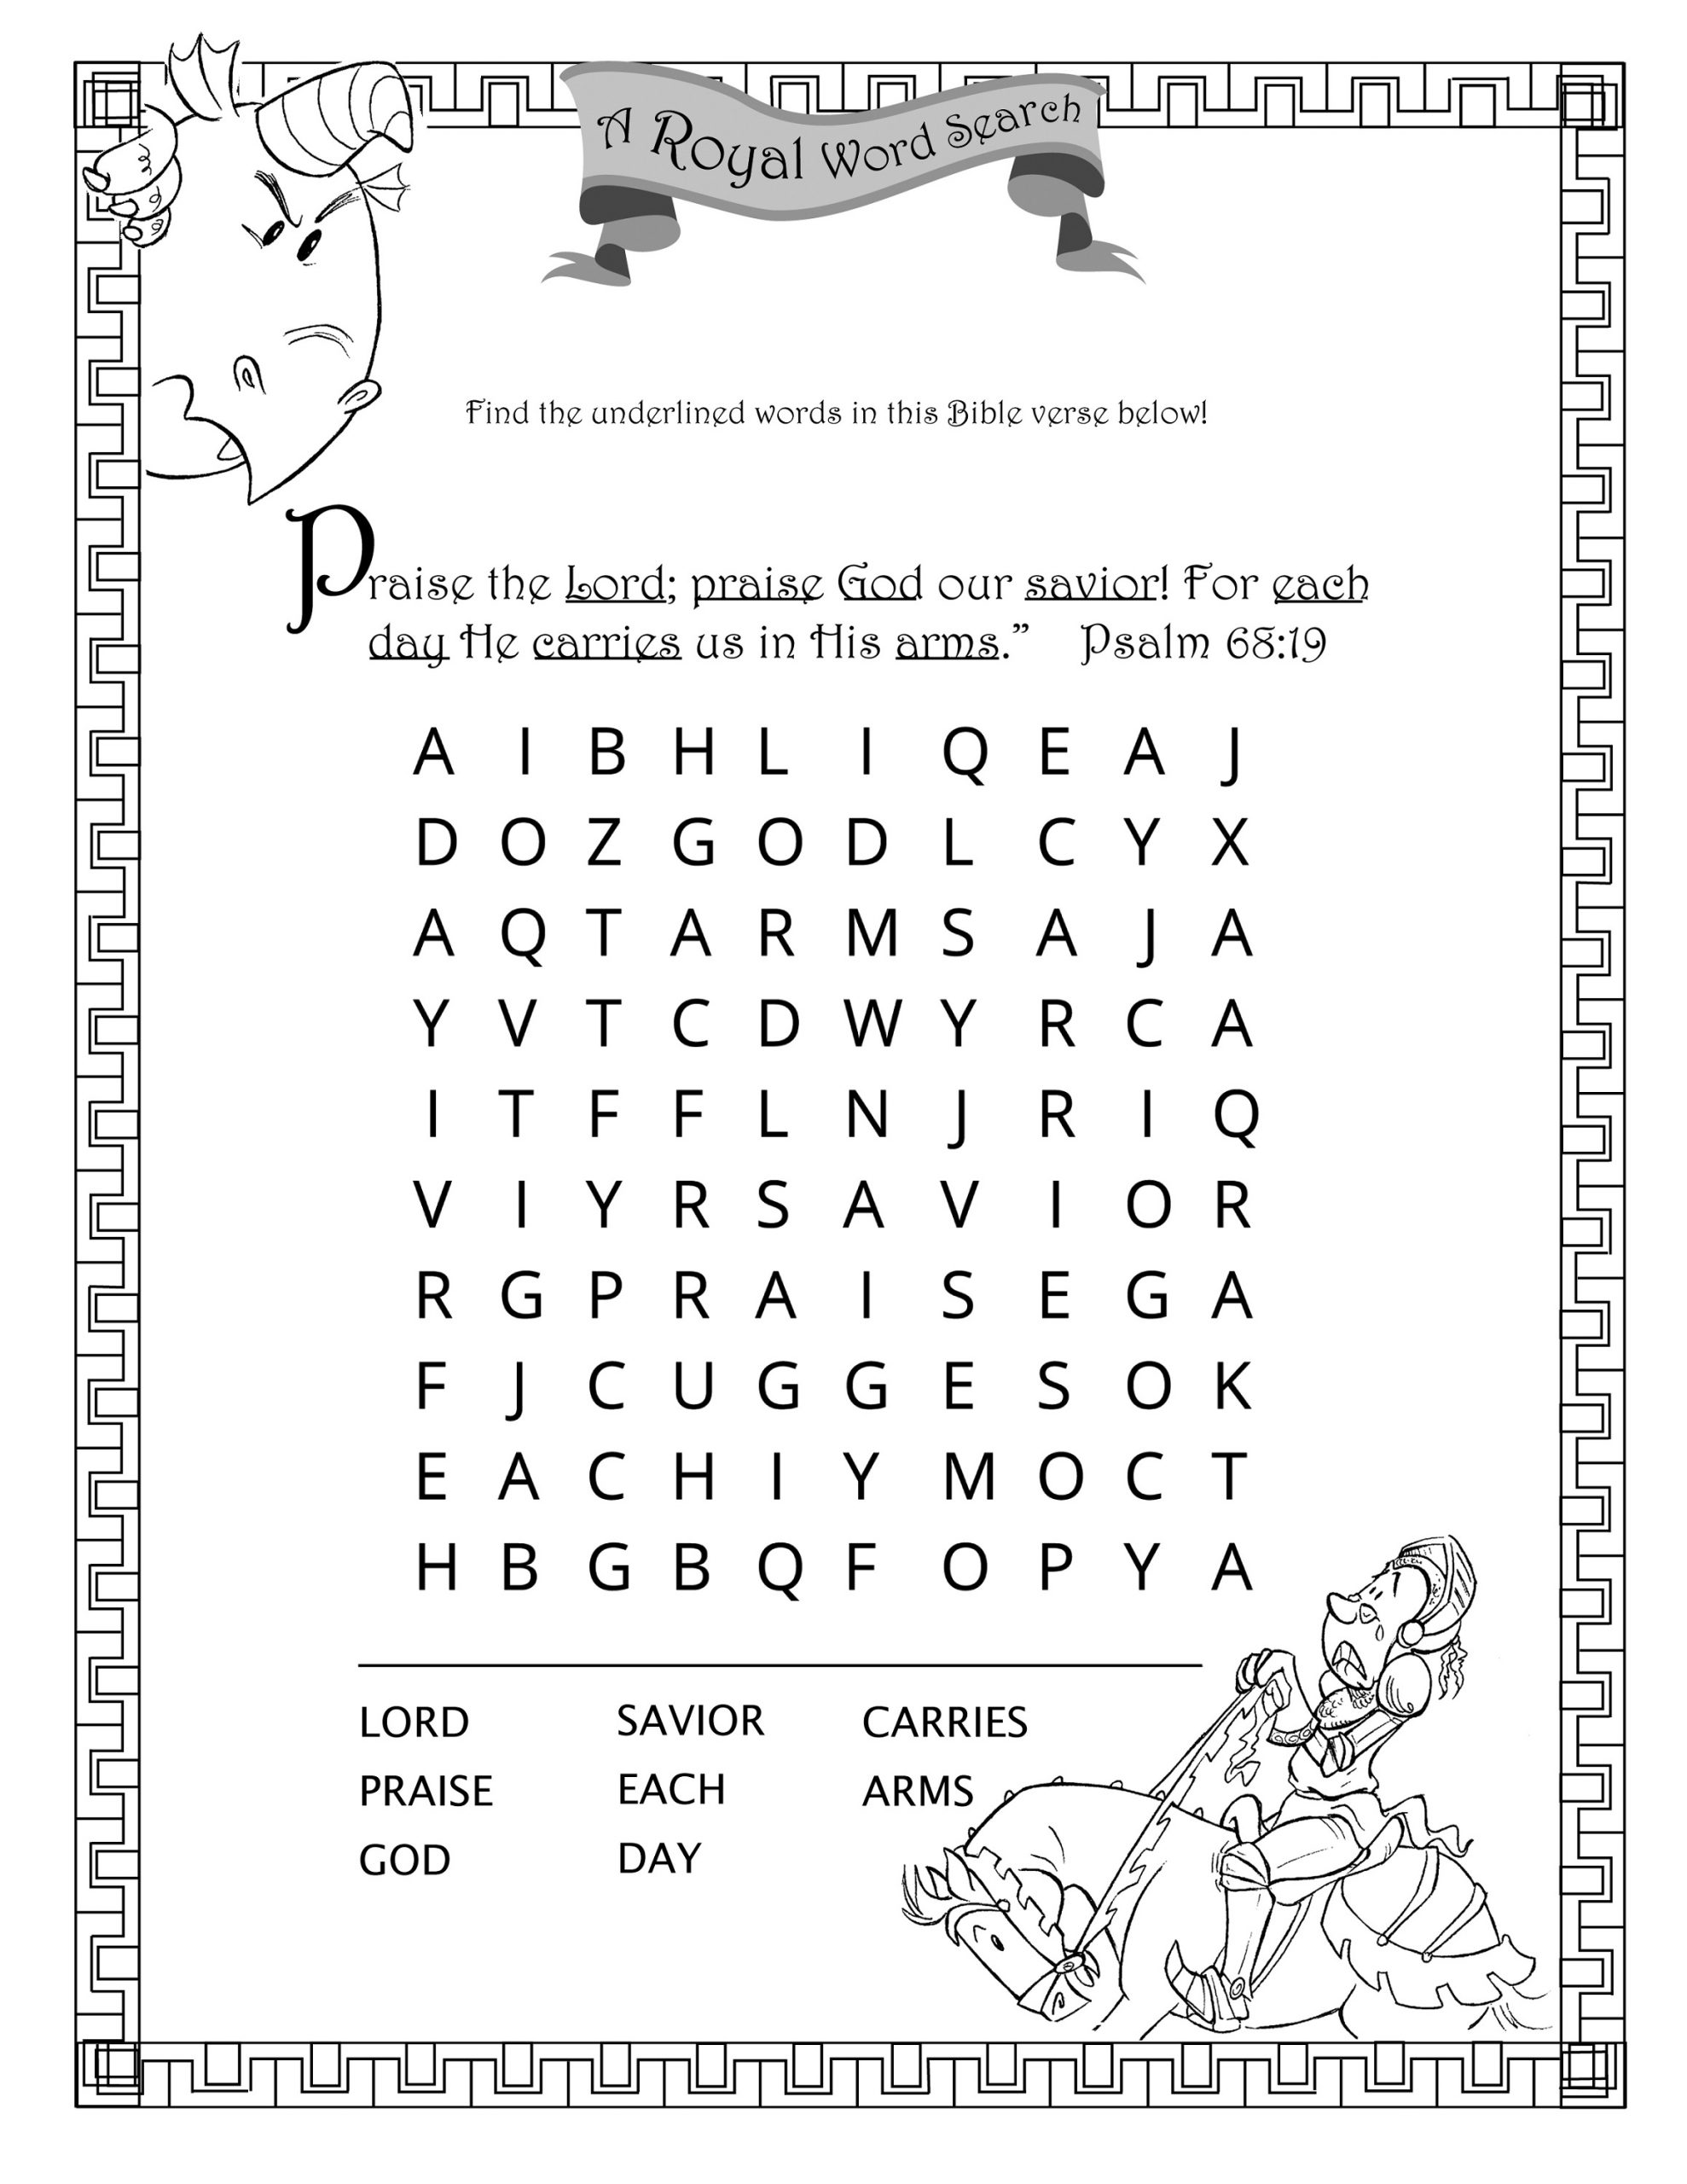 Activity Sheet for Kids A Royal Word Search